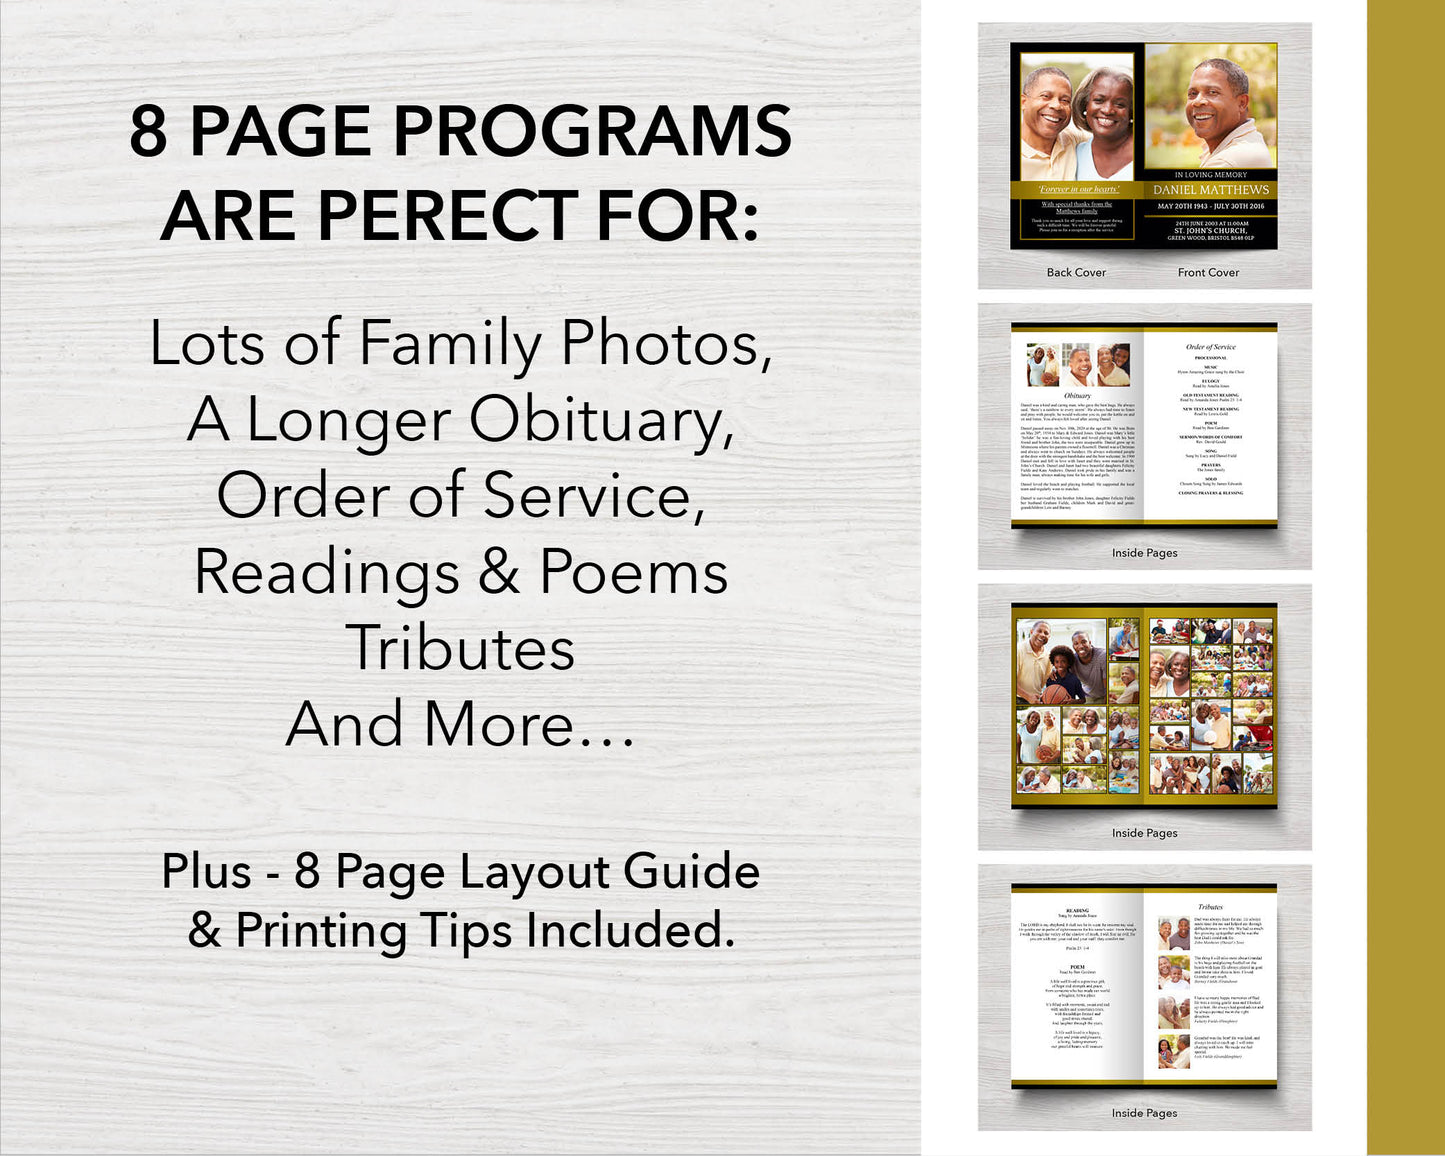 8 Page Golden Funeral Program Template (11 x 17 inches)